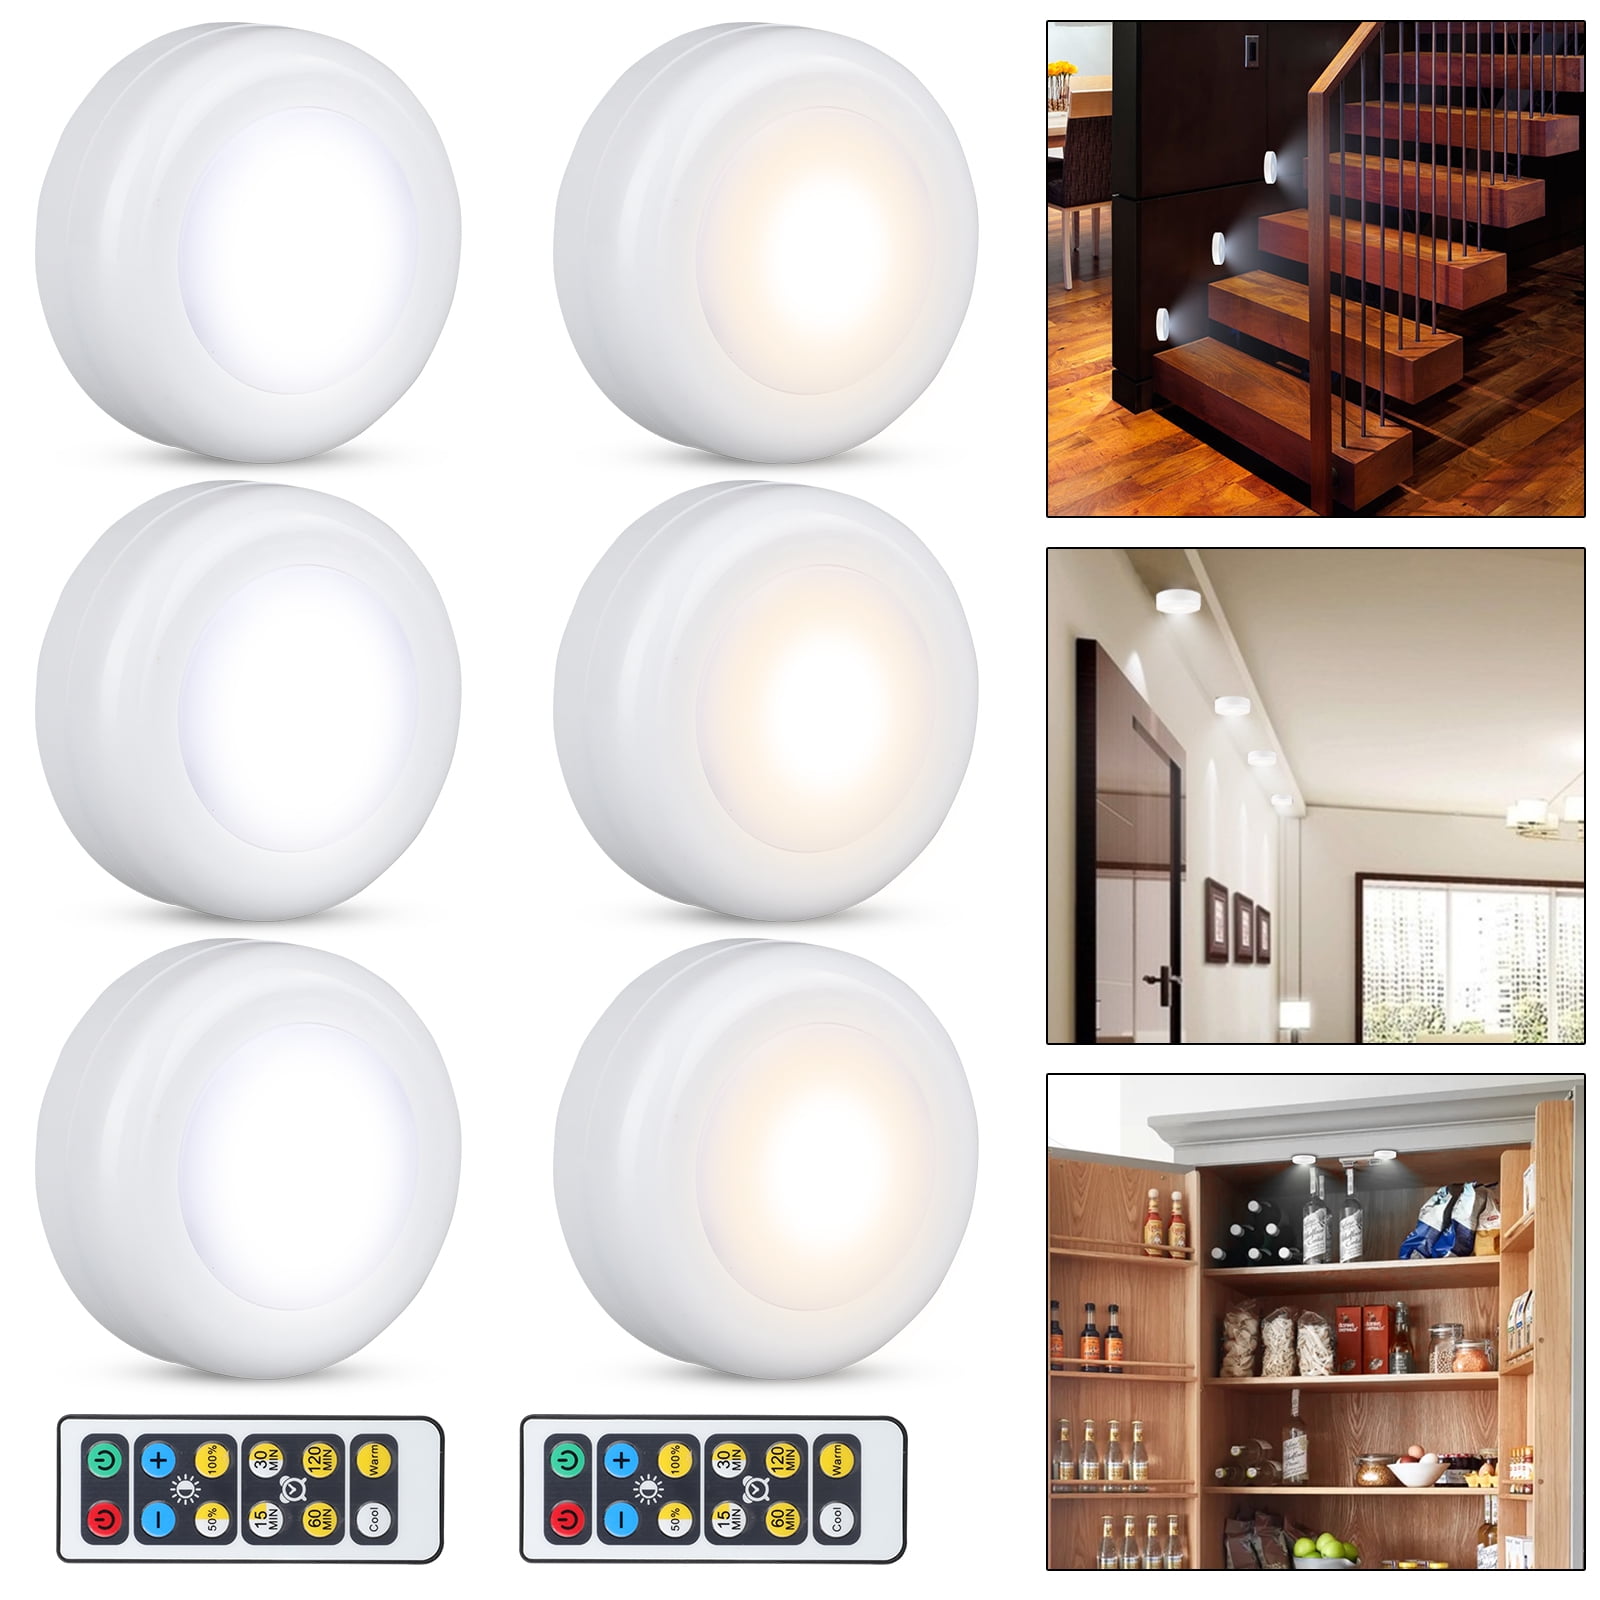 Led Puck Lights With Remote Control, Remote Control Led Ceiling Lights Battery Powered